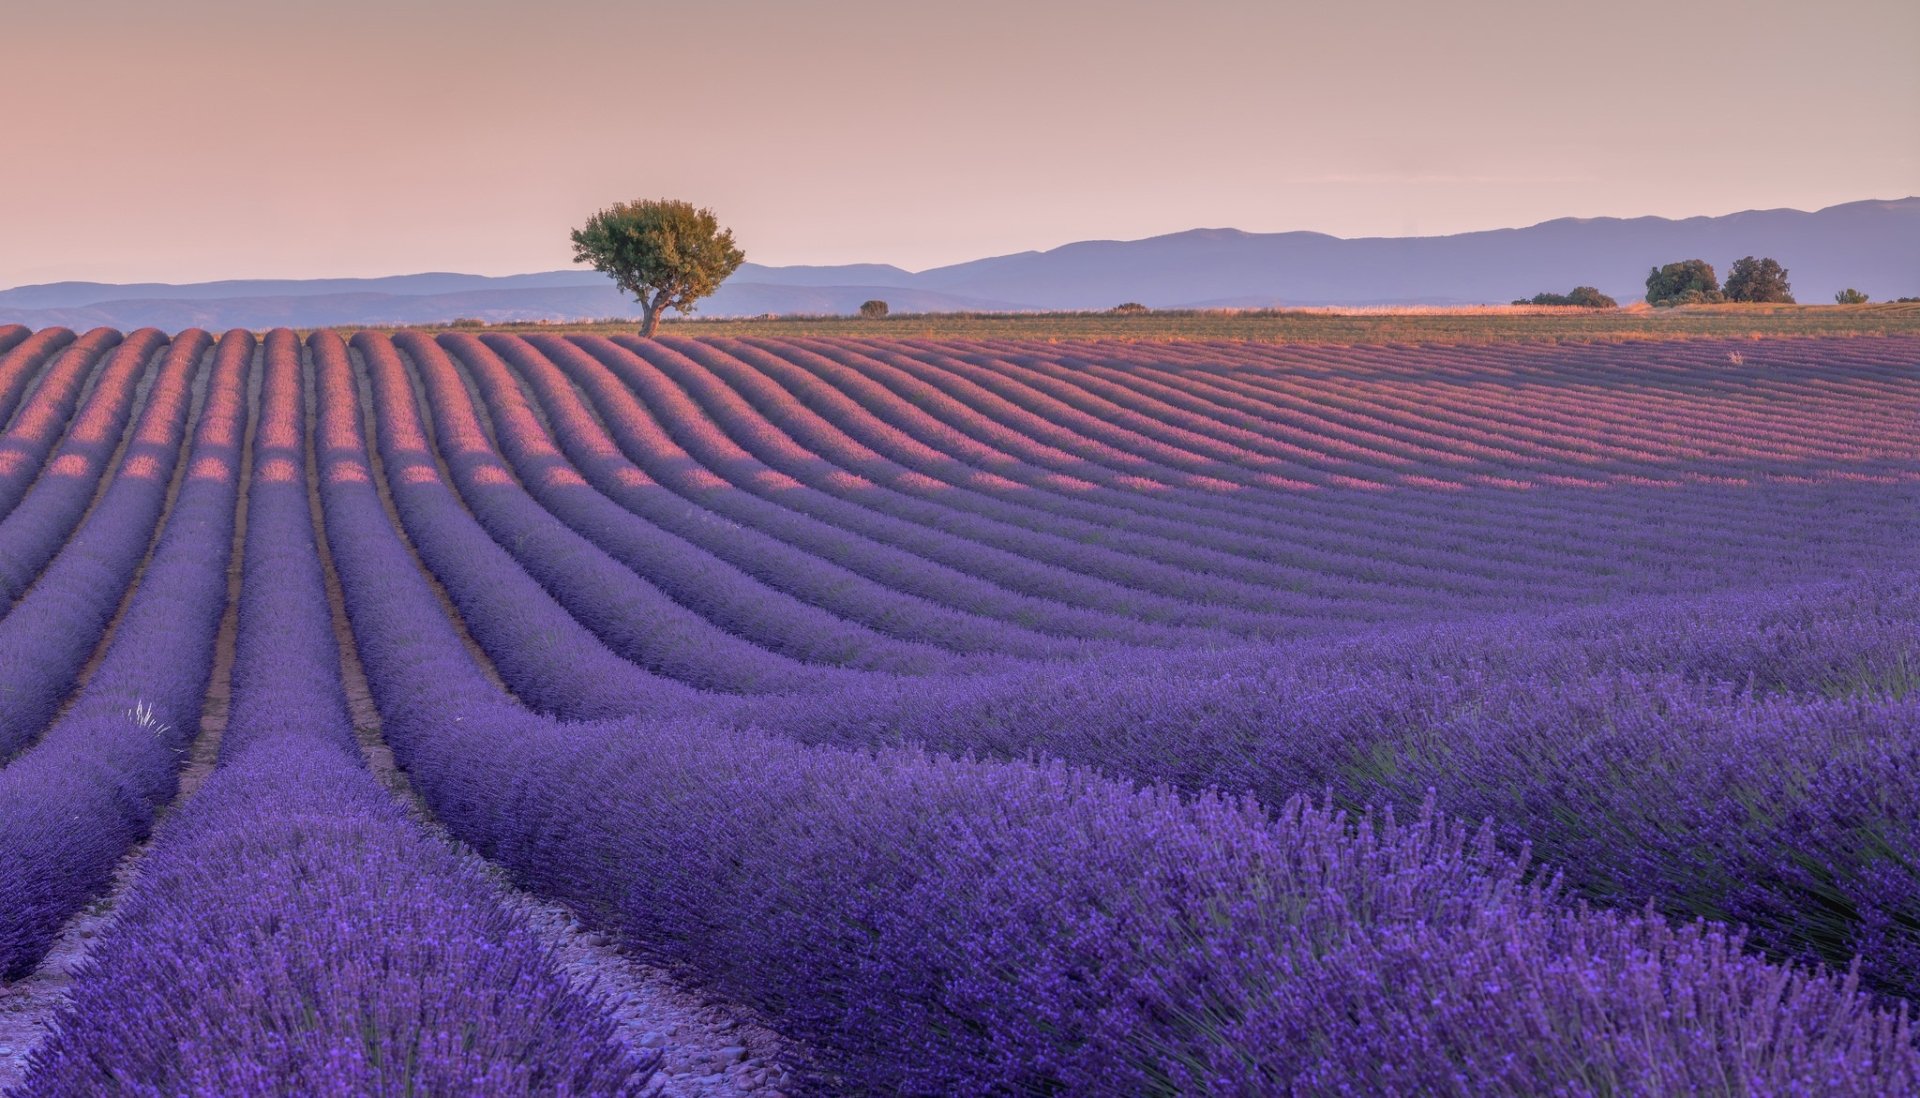 Lavender HD Wallpaper | Background Image | 2048x1171 | ID:864317 - Wallpaper Abyss